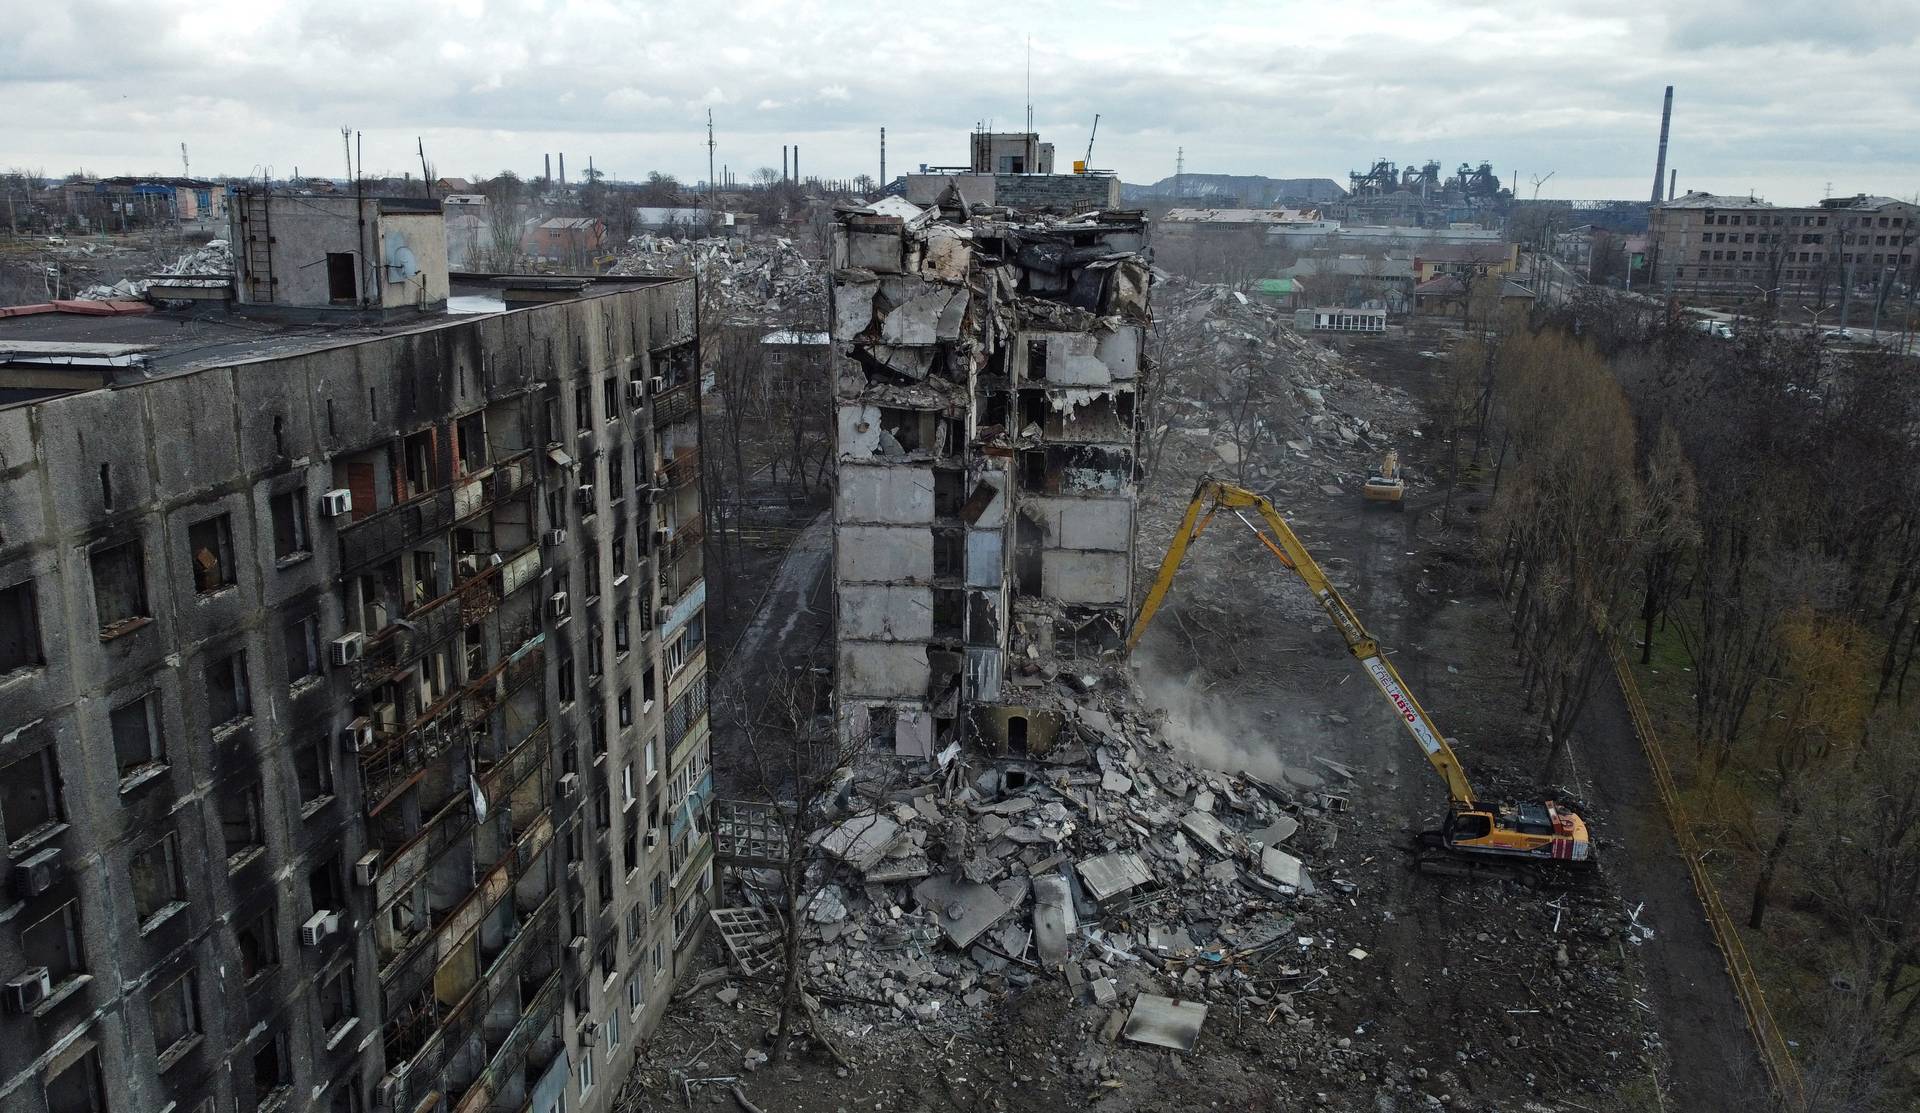 An excavator demolishes a ruined apartment block in Mariupol